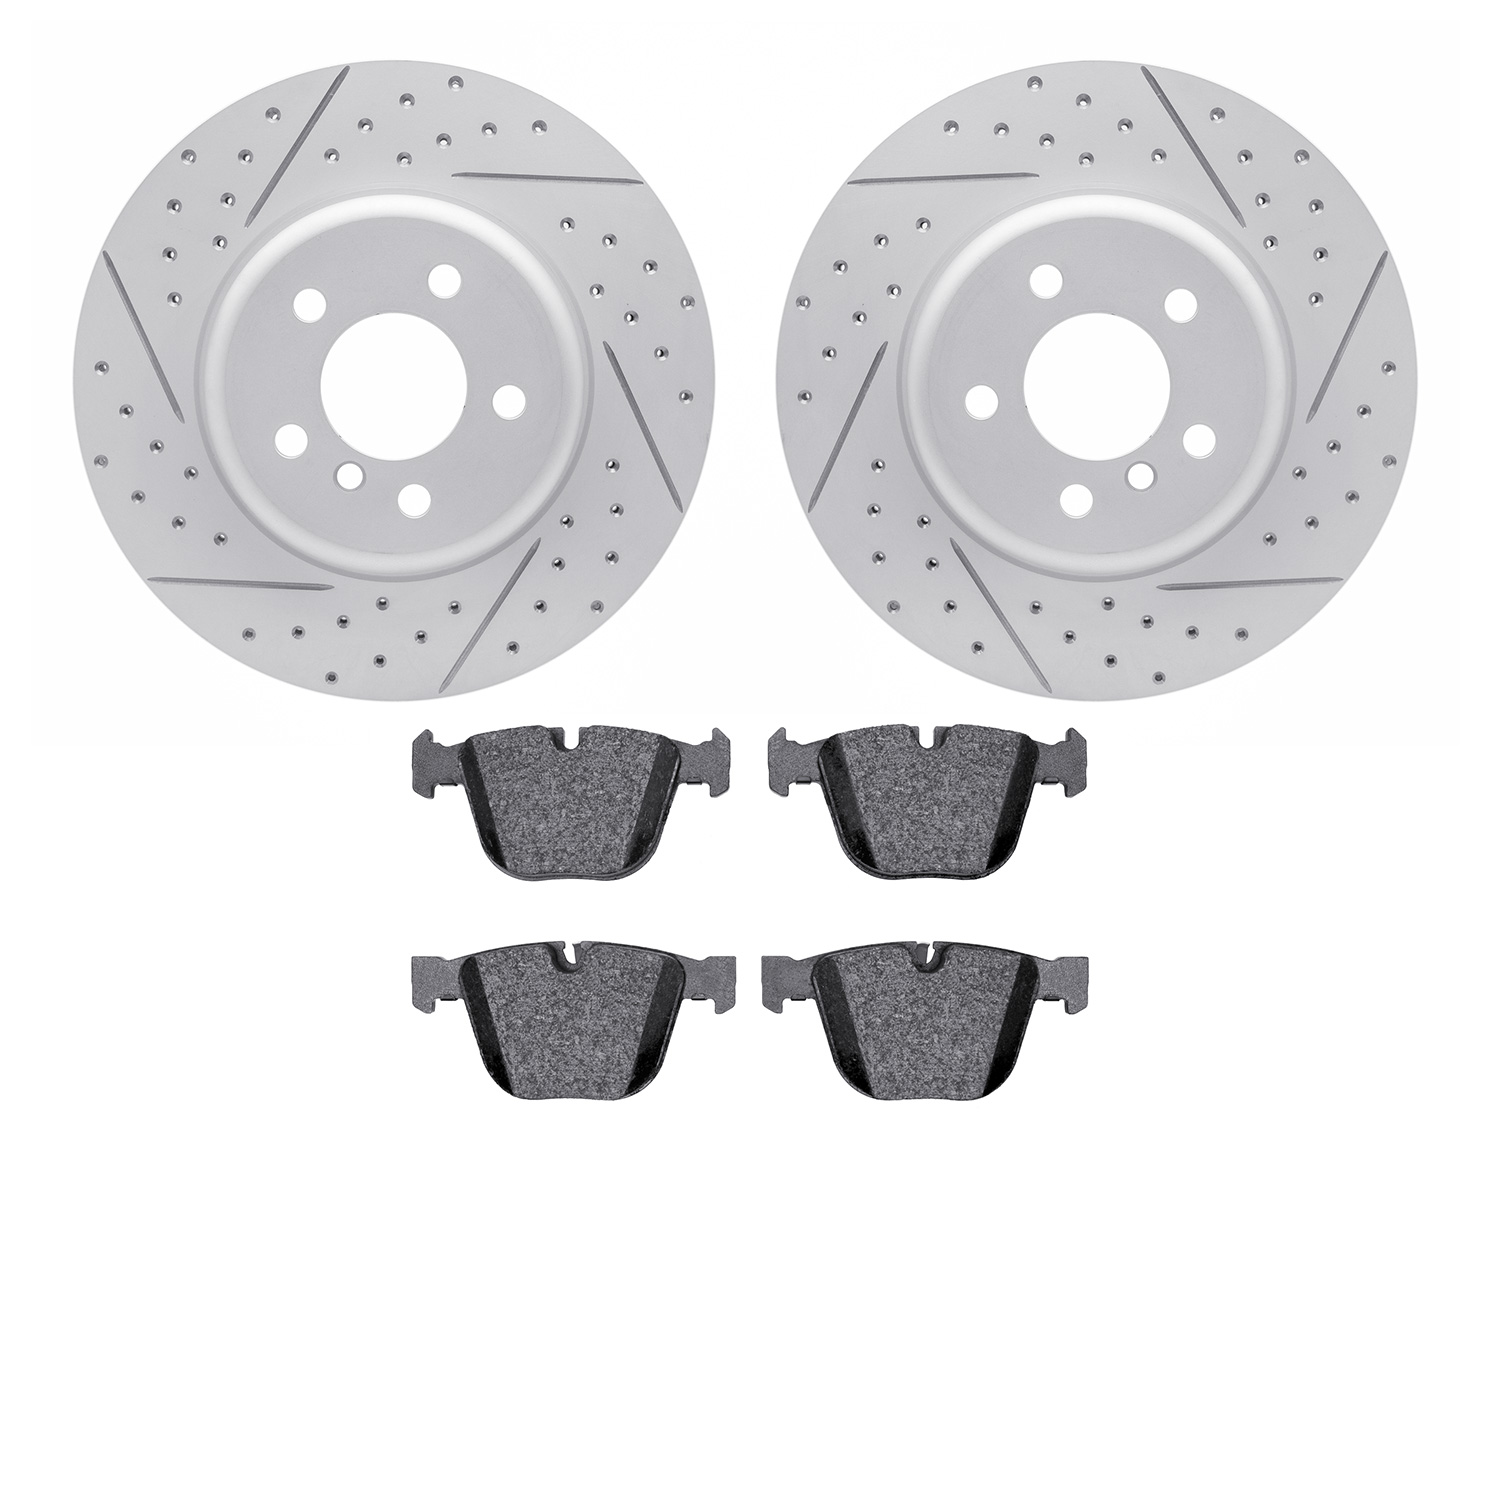 2502-31082 Geoperformance Drilled/Slotted Rotors w/5000 Advanced Brake Pads Kit, 2010-2017 BMW, Position: Rear